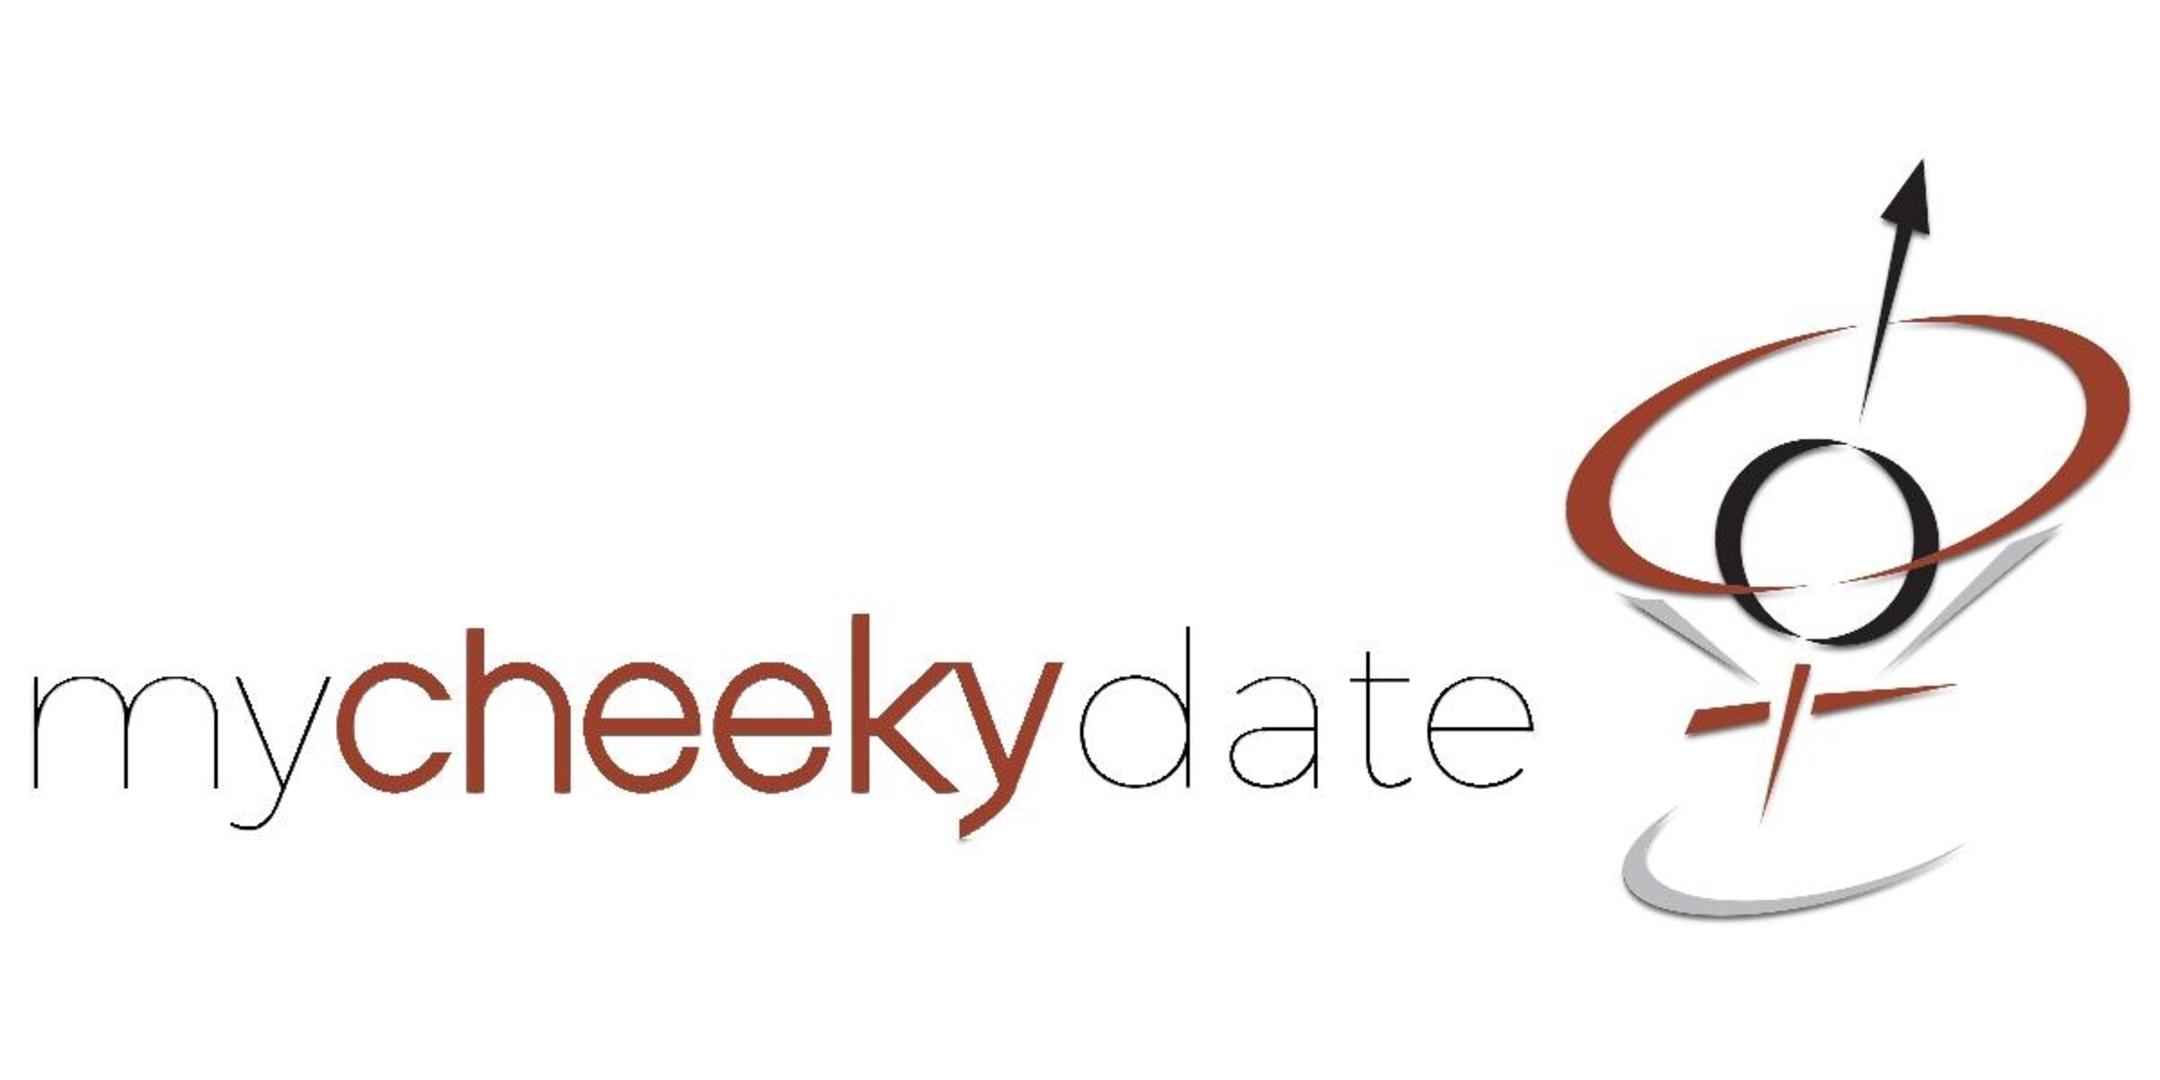 Speed Dating | Singles Event in Sydney | Fancy A Go?